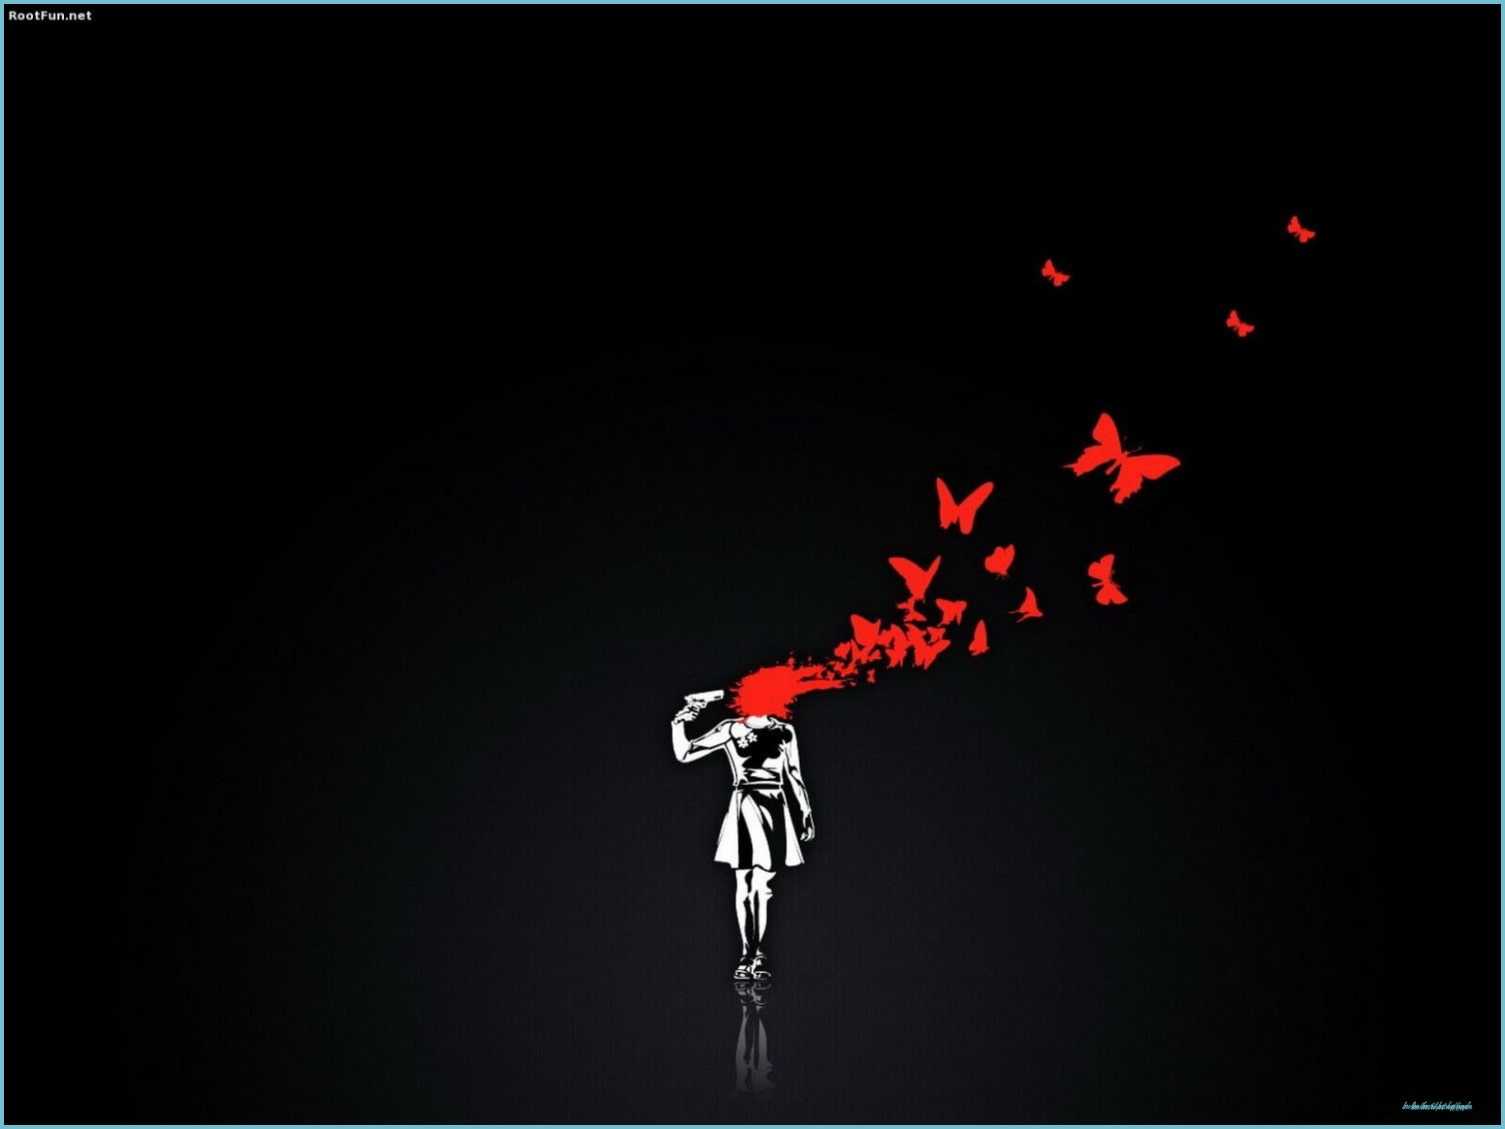 A woman with red butterflies flying around her - Black heart